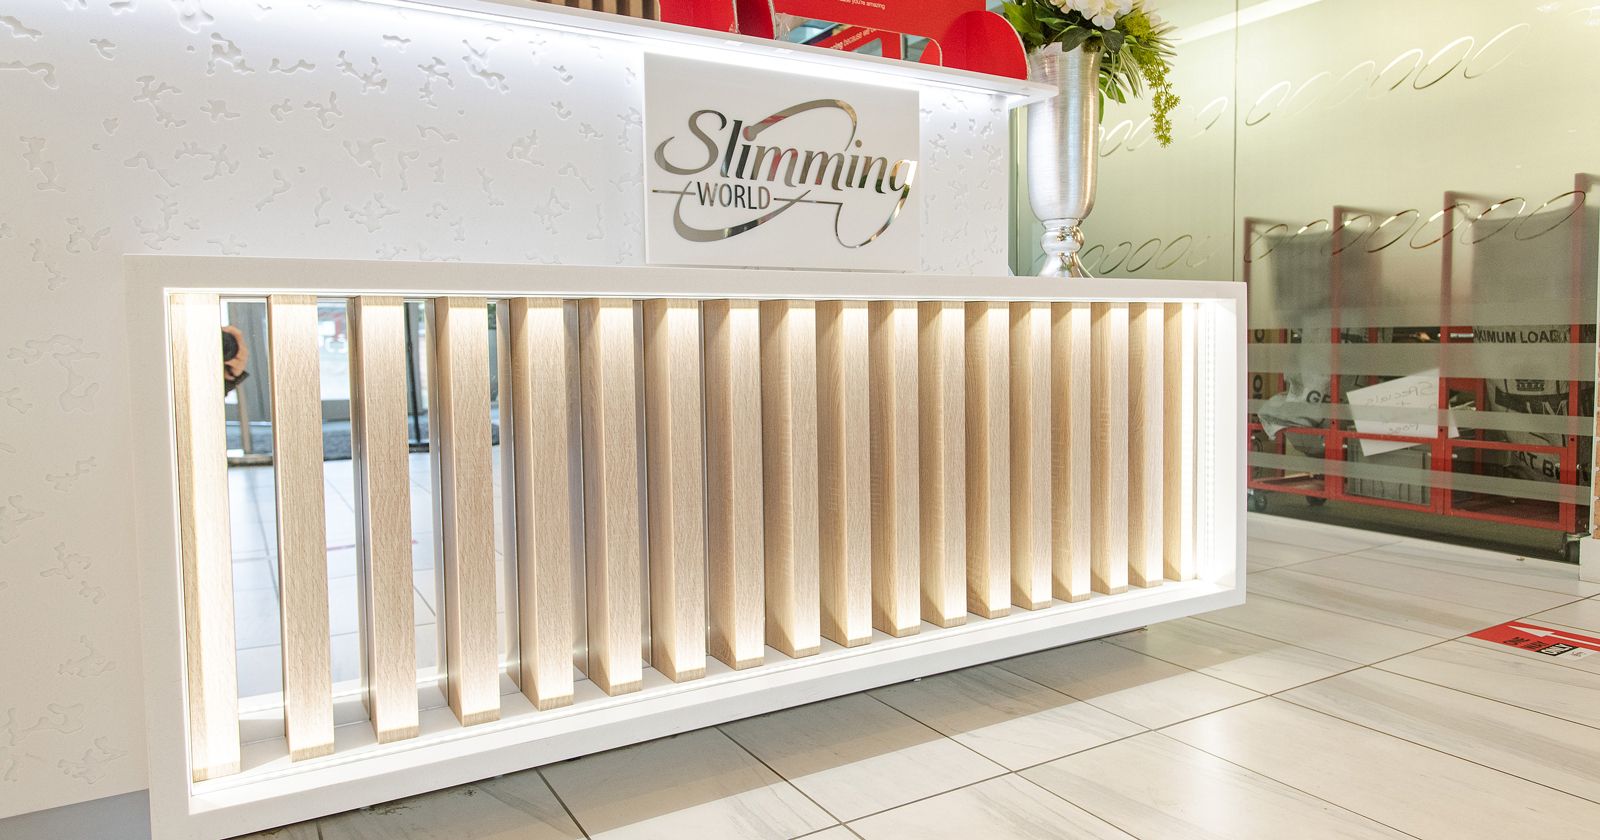 Slimming World Head Office Reception Desk Bespoke Joinery designed and built by APSS Joinery